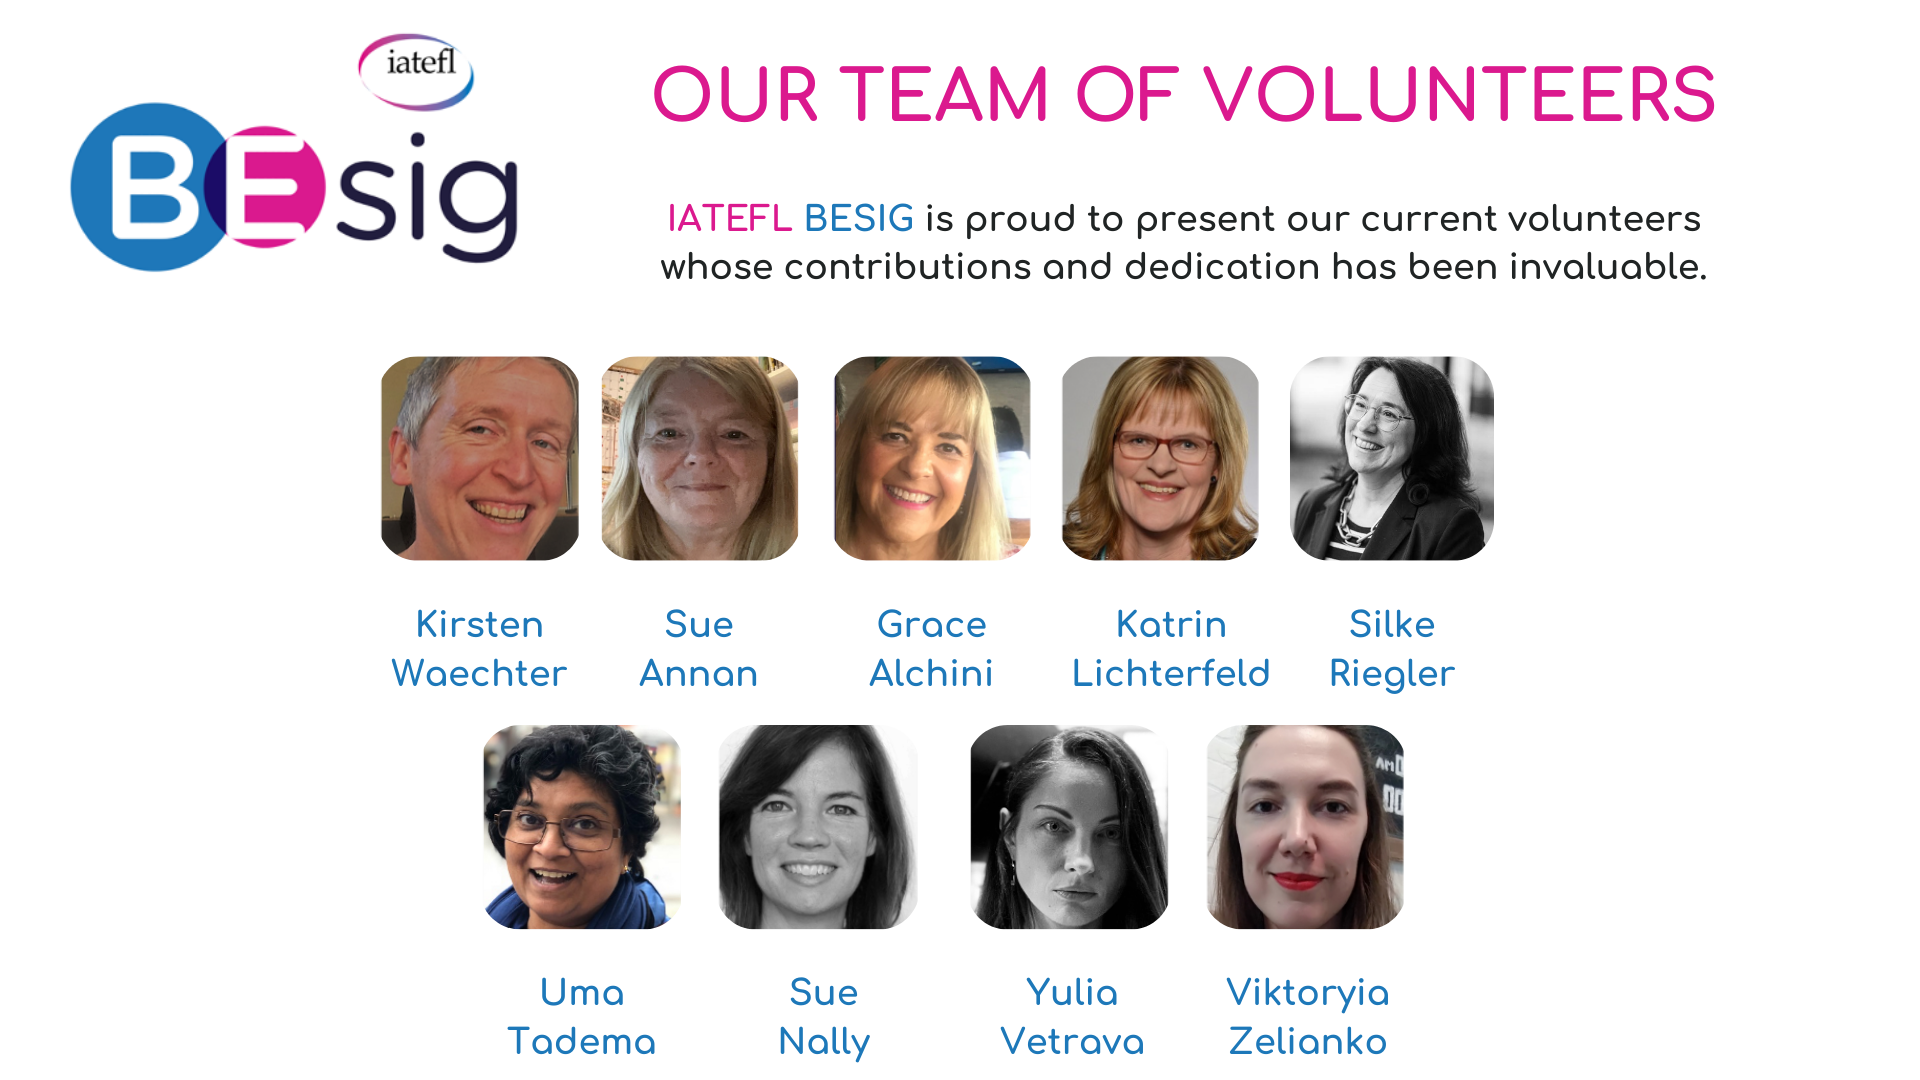 A slide for IATEFL BESIG's team of volunteers with photos and names.